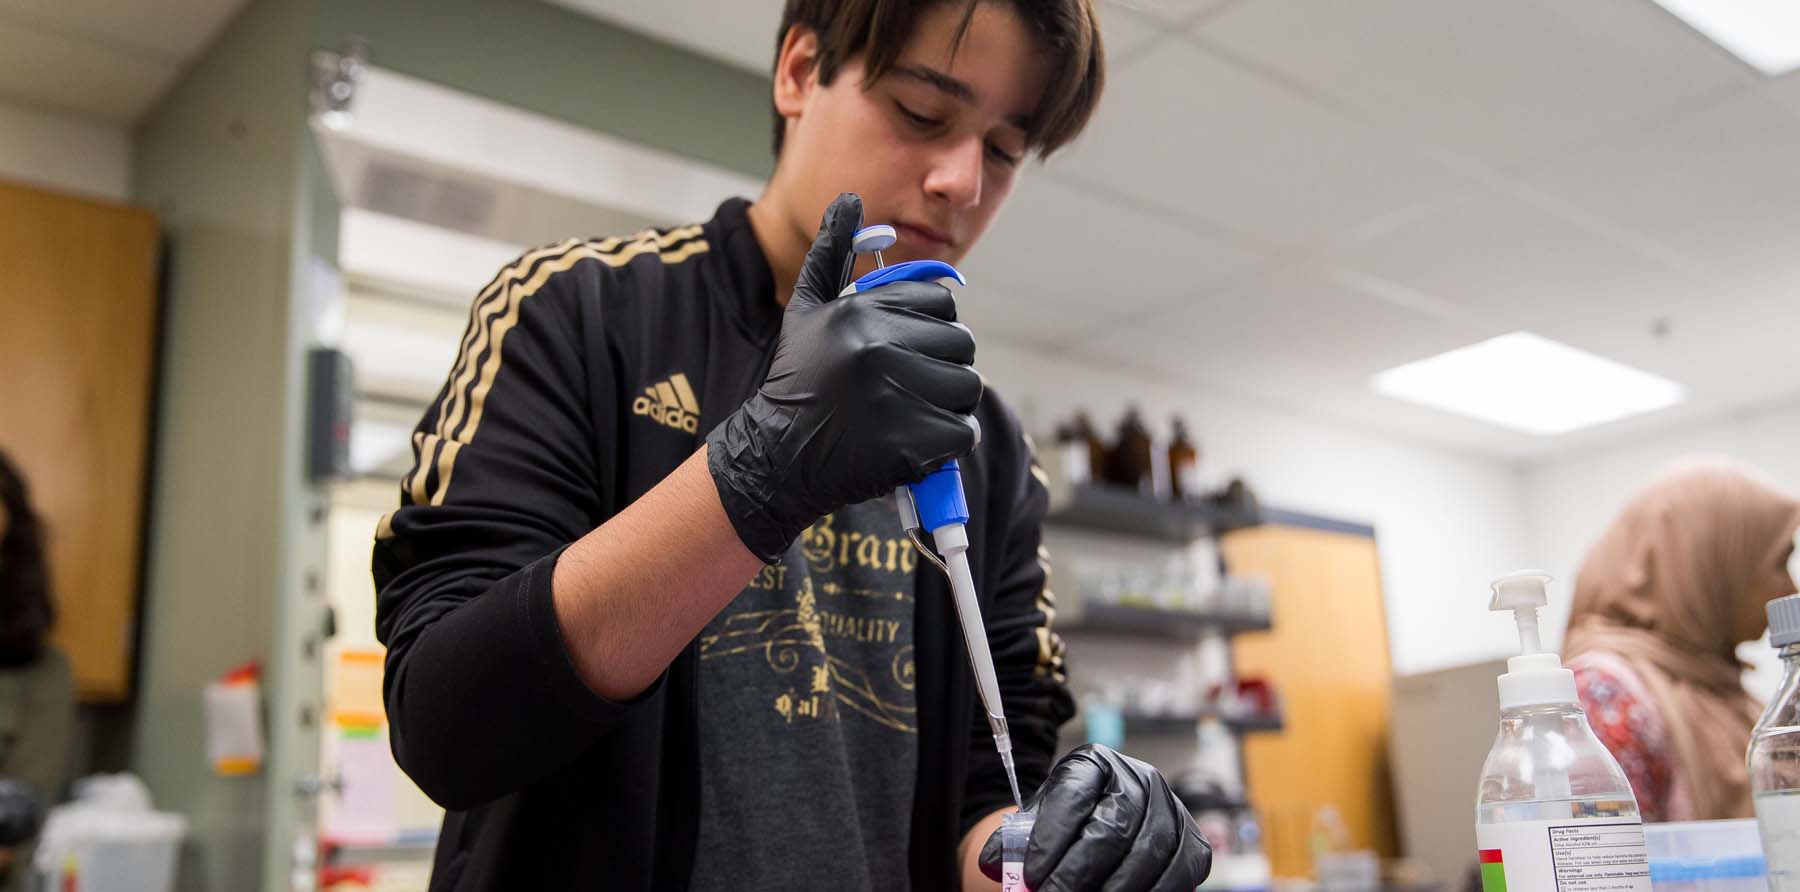 A Frontiers of Science Institute student titrates a solution into a test tube.